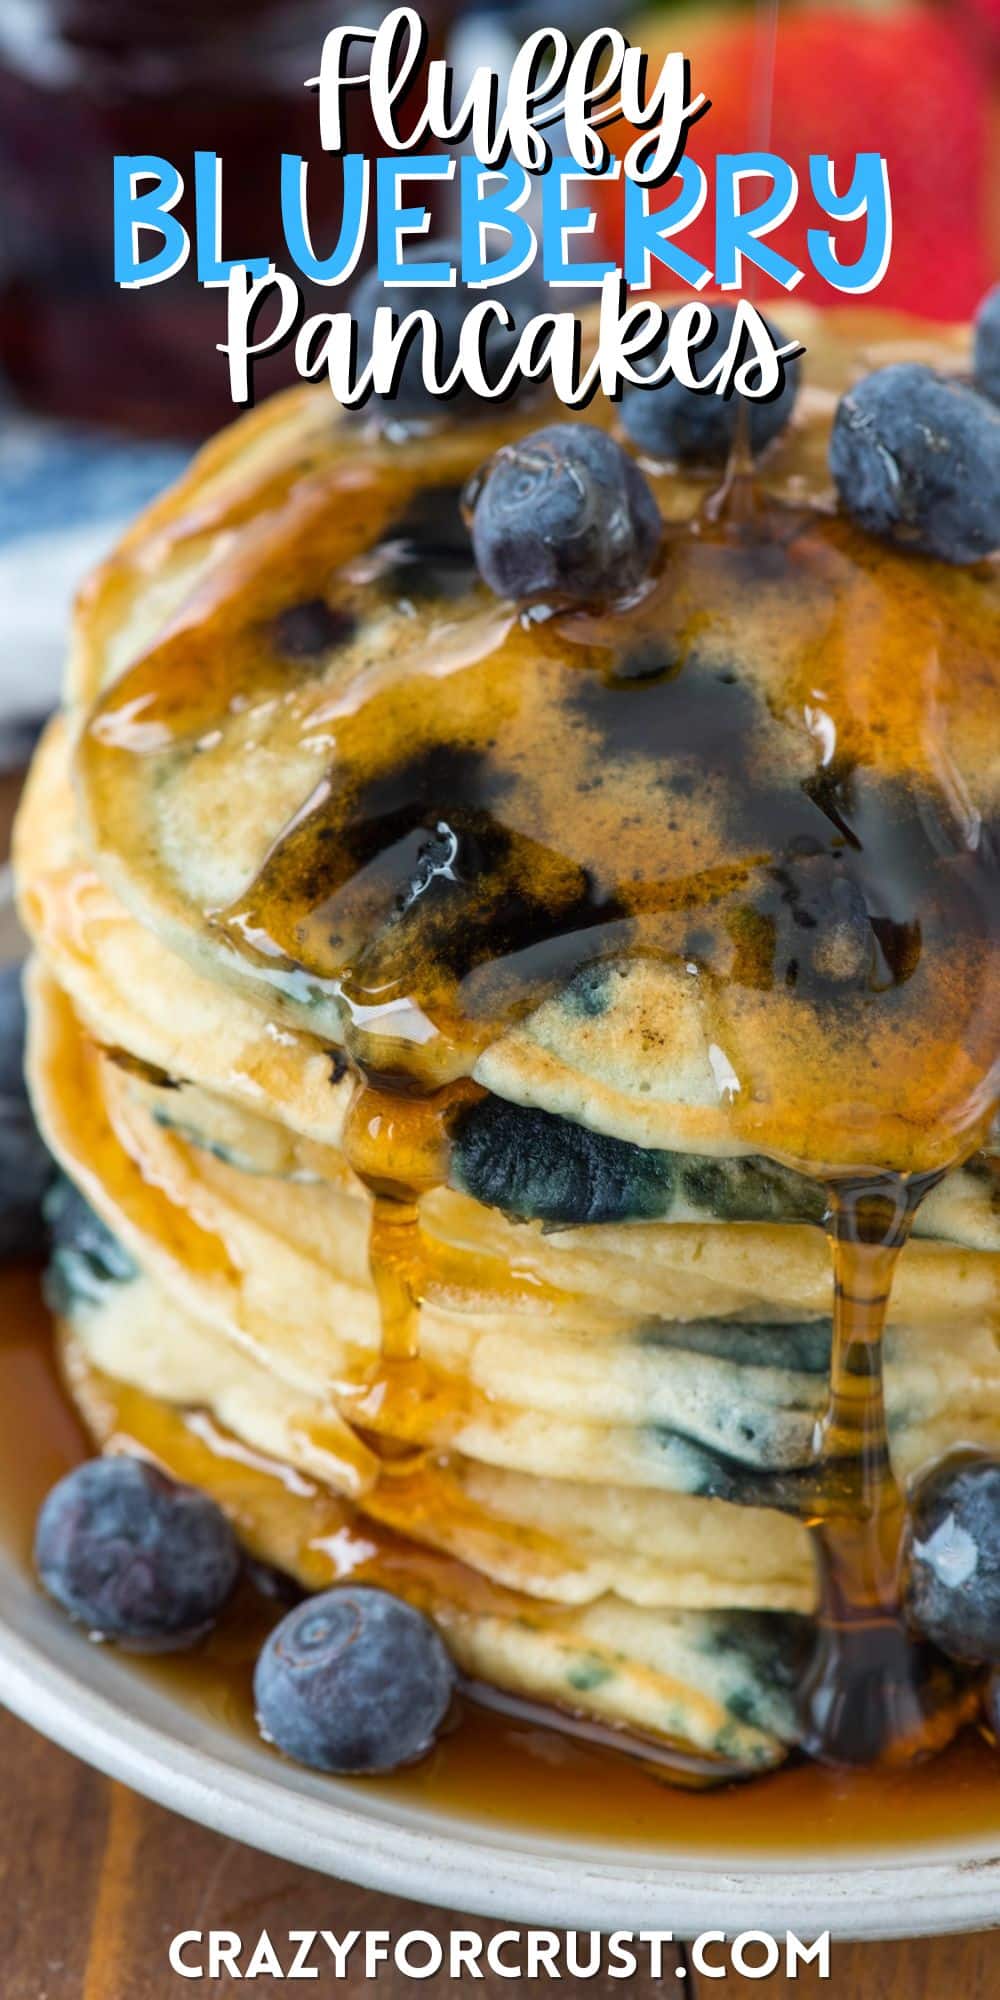 stacked pancakes with blueberries baked in and covered in syrup with words on the image.